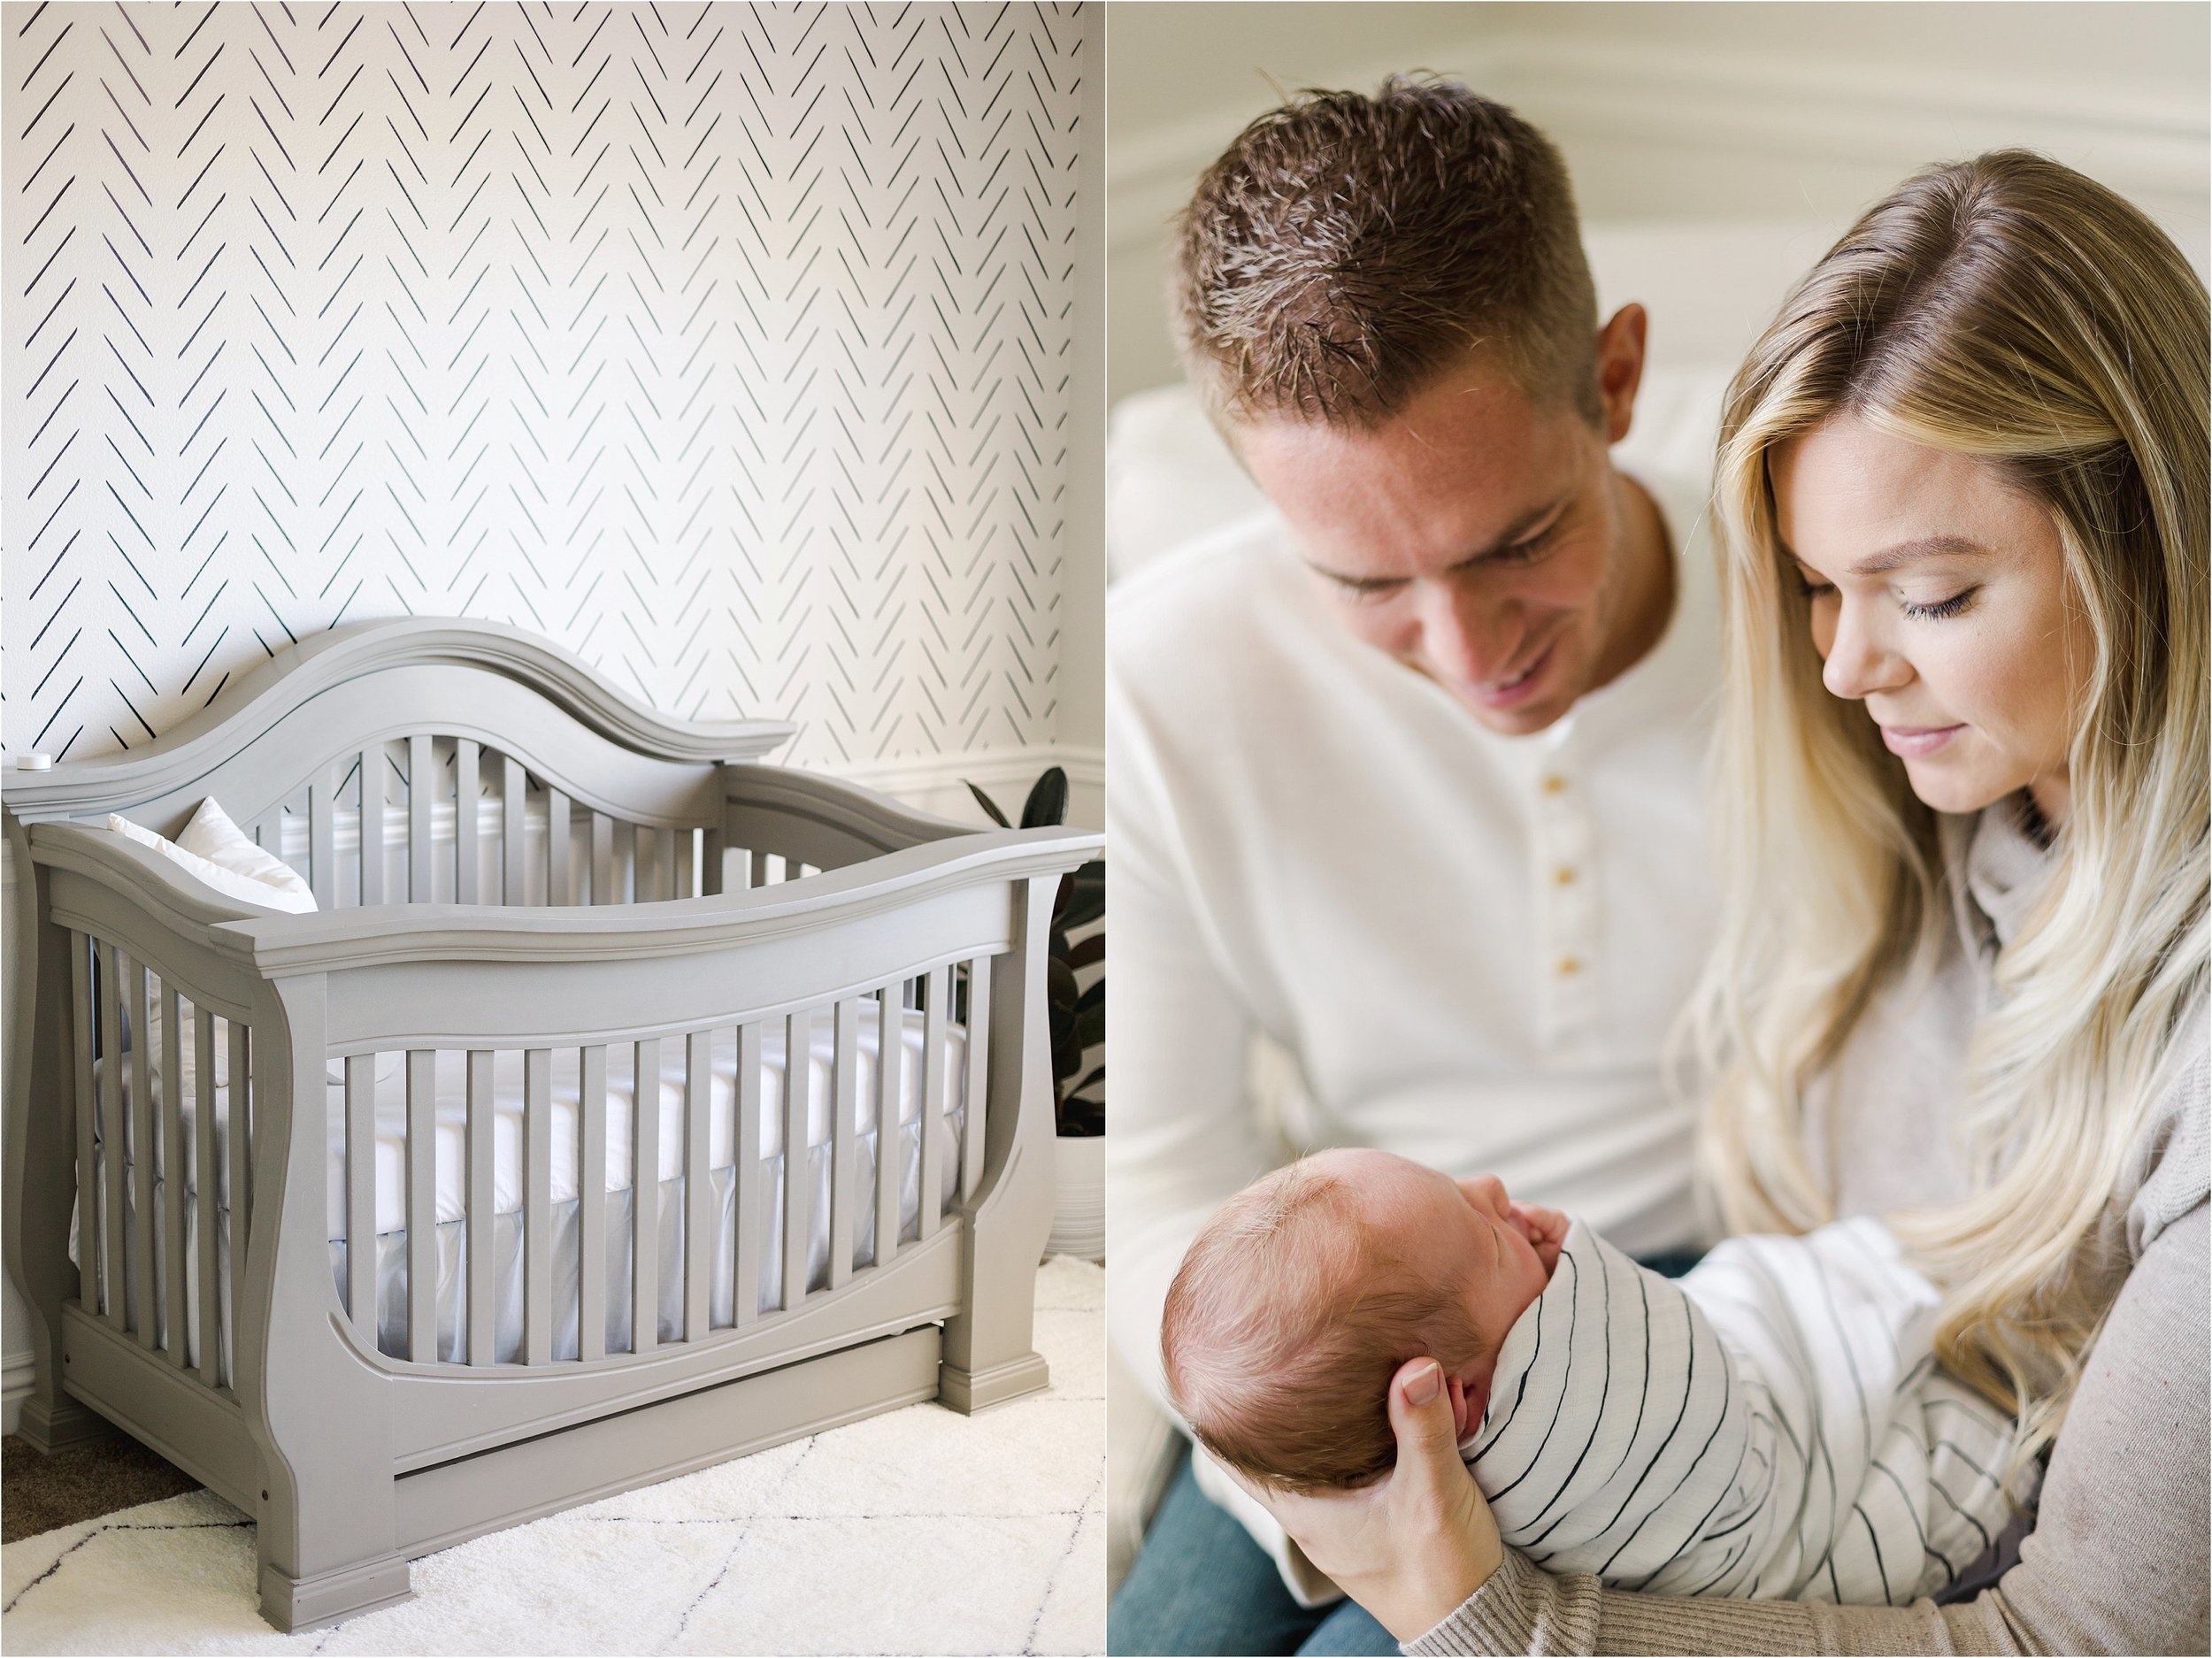 Image on the left shows a grey crib in the baby boys nursery.  Image on the right shows blonde Mother holding her newborn son as she and her husband smile down at him.